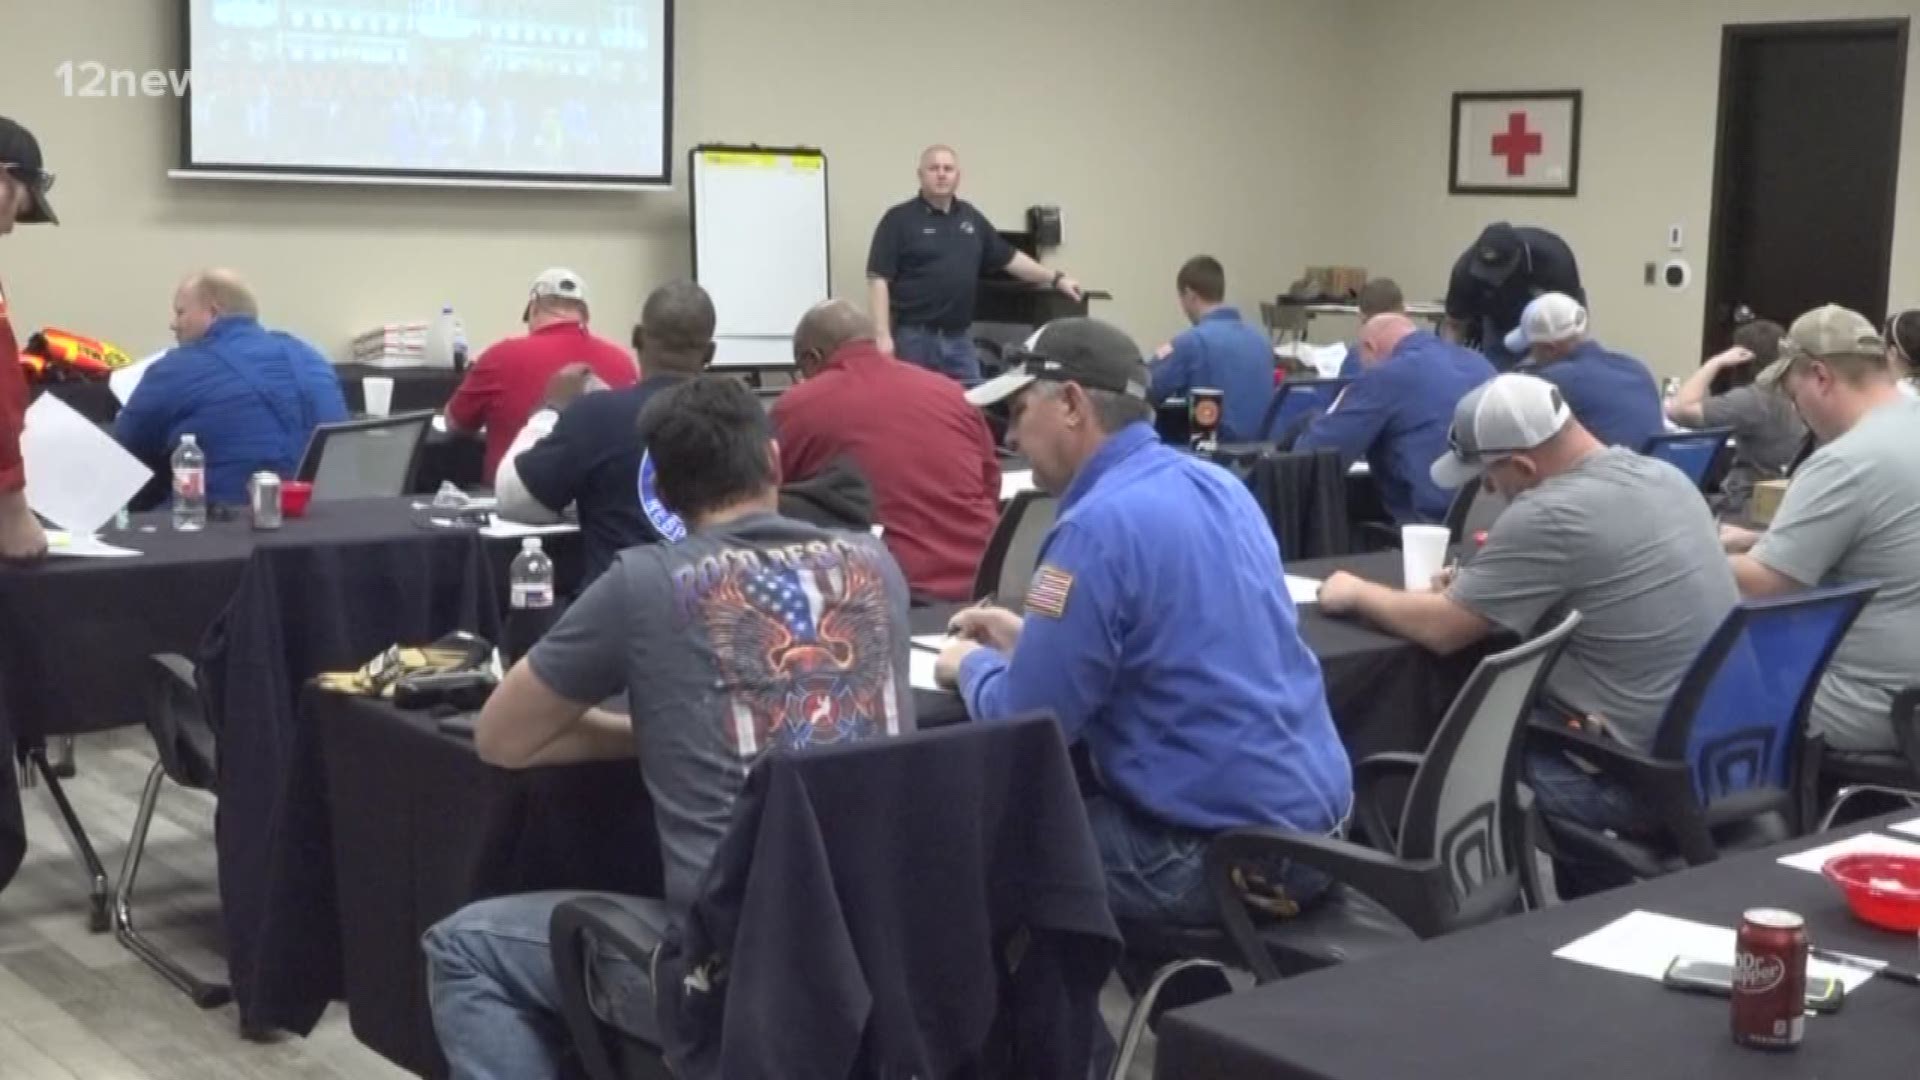 Valero Port Arthur Refinery complete annual safety class at Beaumont safety training facility.